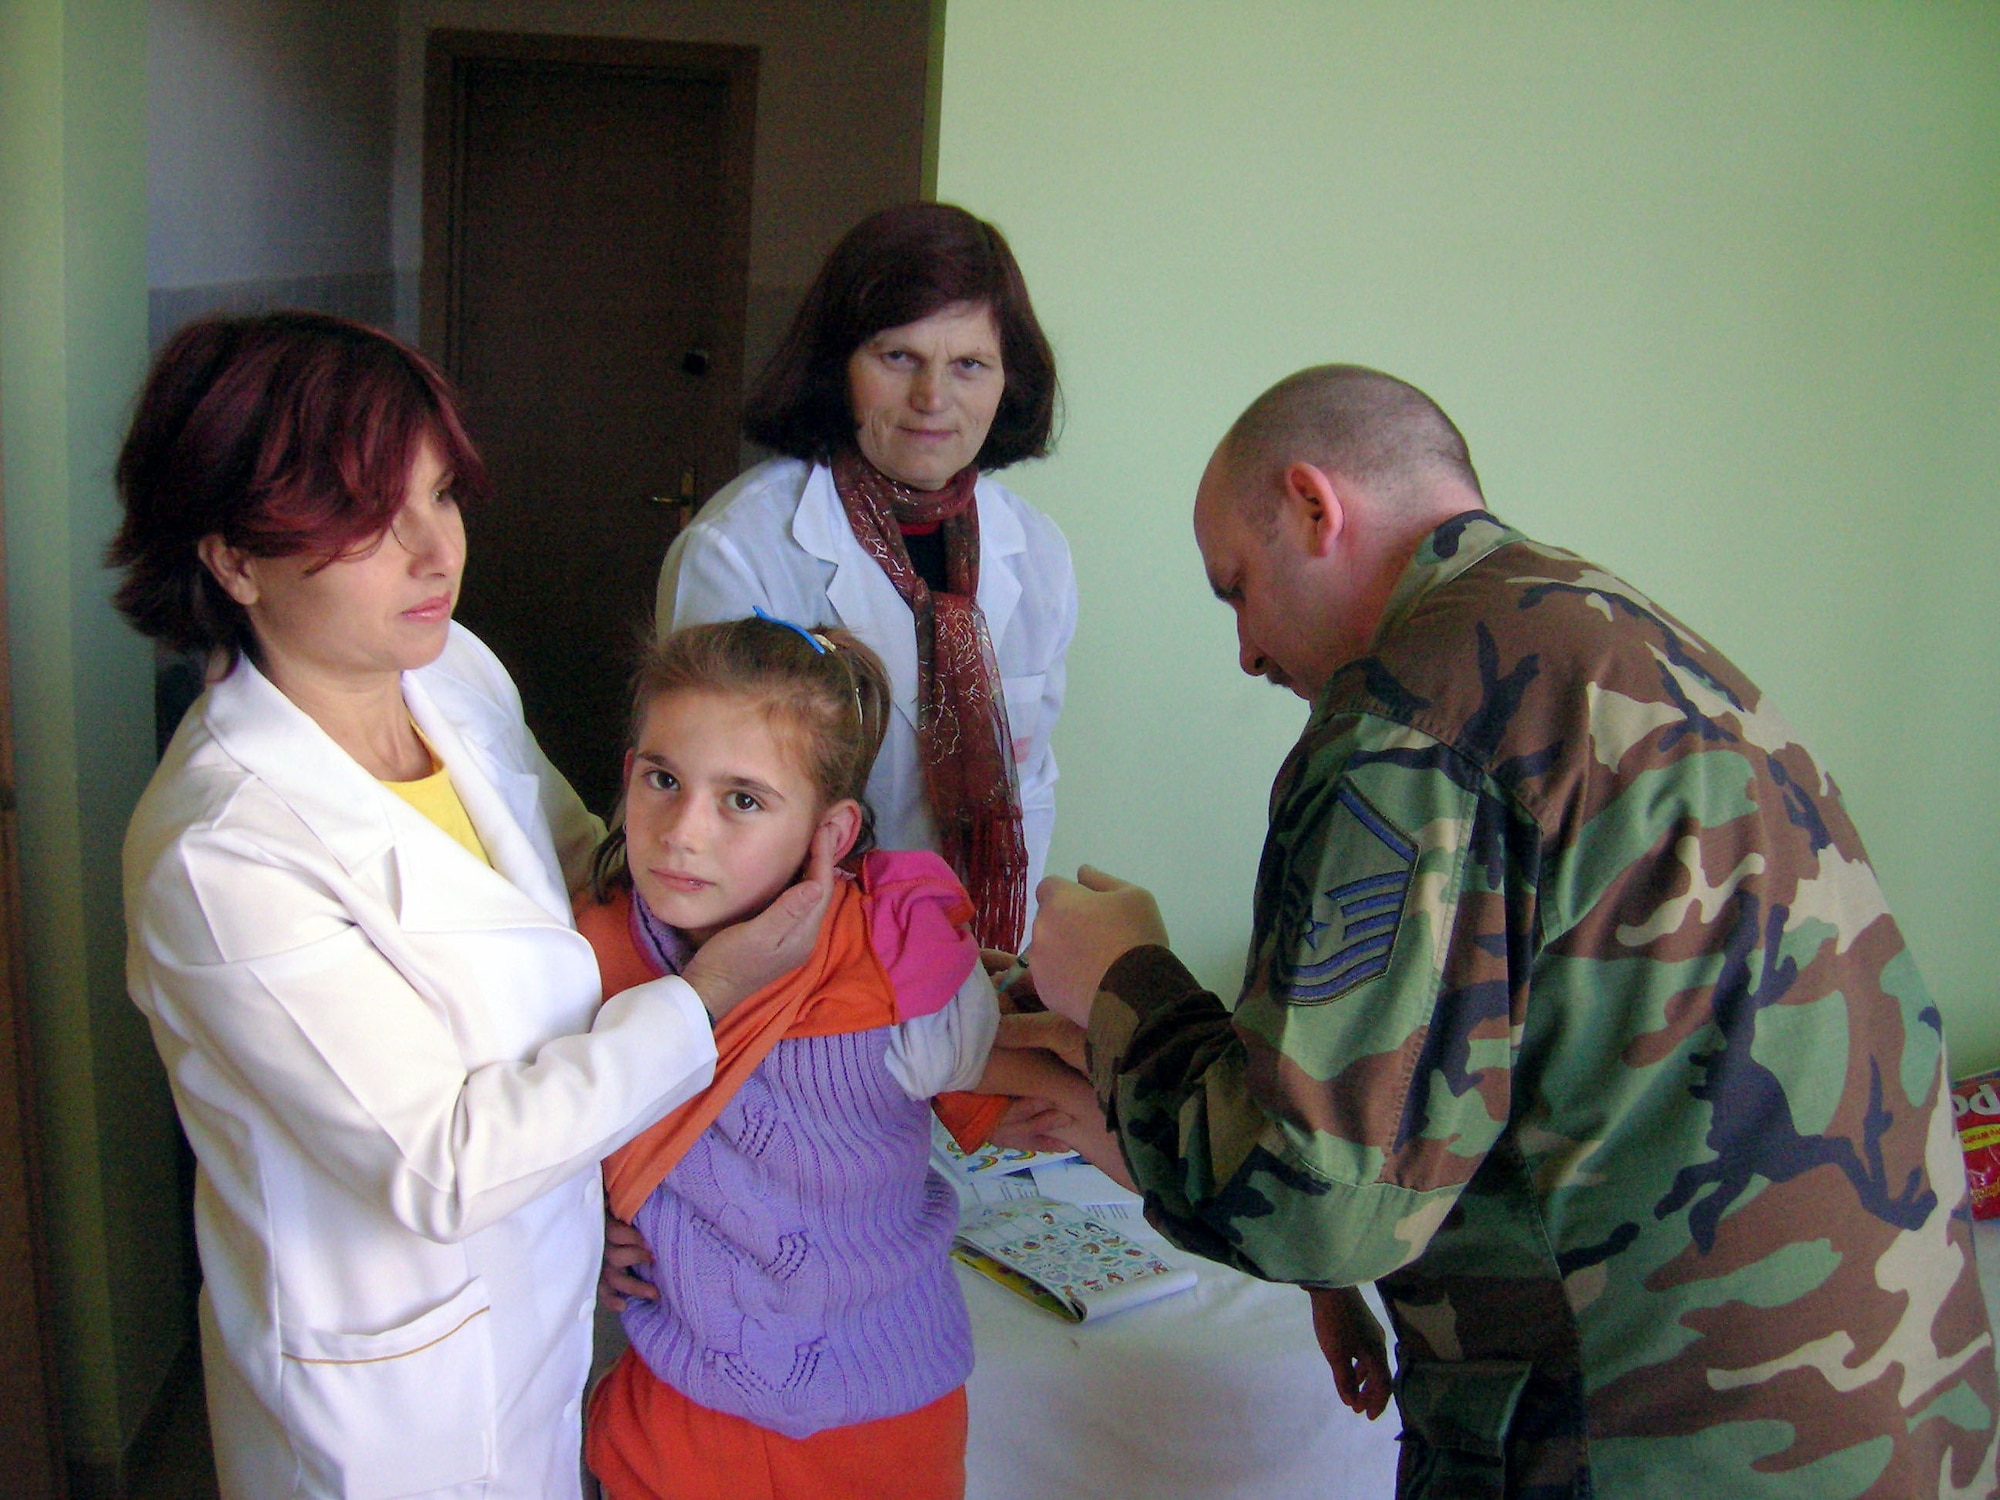 Master Sgt. James Welch immunizes a girl as Albanian nurses provide assistance in February in Albania. Sergeant Welch, along with four other 109th Airlift Wing medics from the Stratton Air National Guard Base in New York, administered 1,000 Hepatitis A shots during a humanitarian mission with the New Jersey National Guard. (Courtesy photo) 
